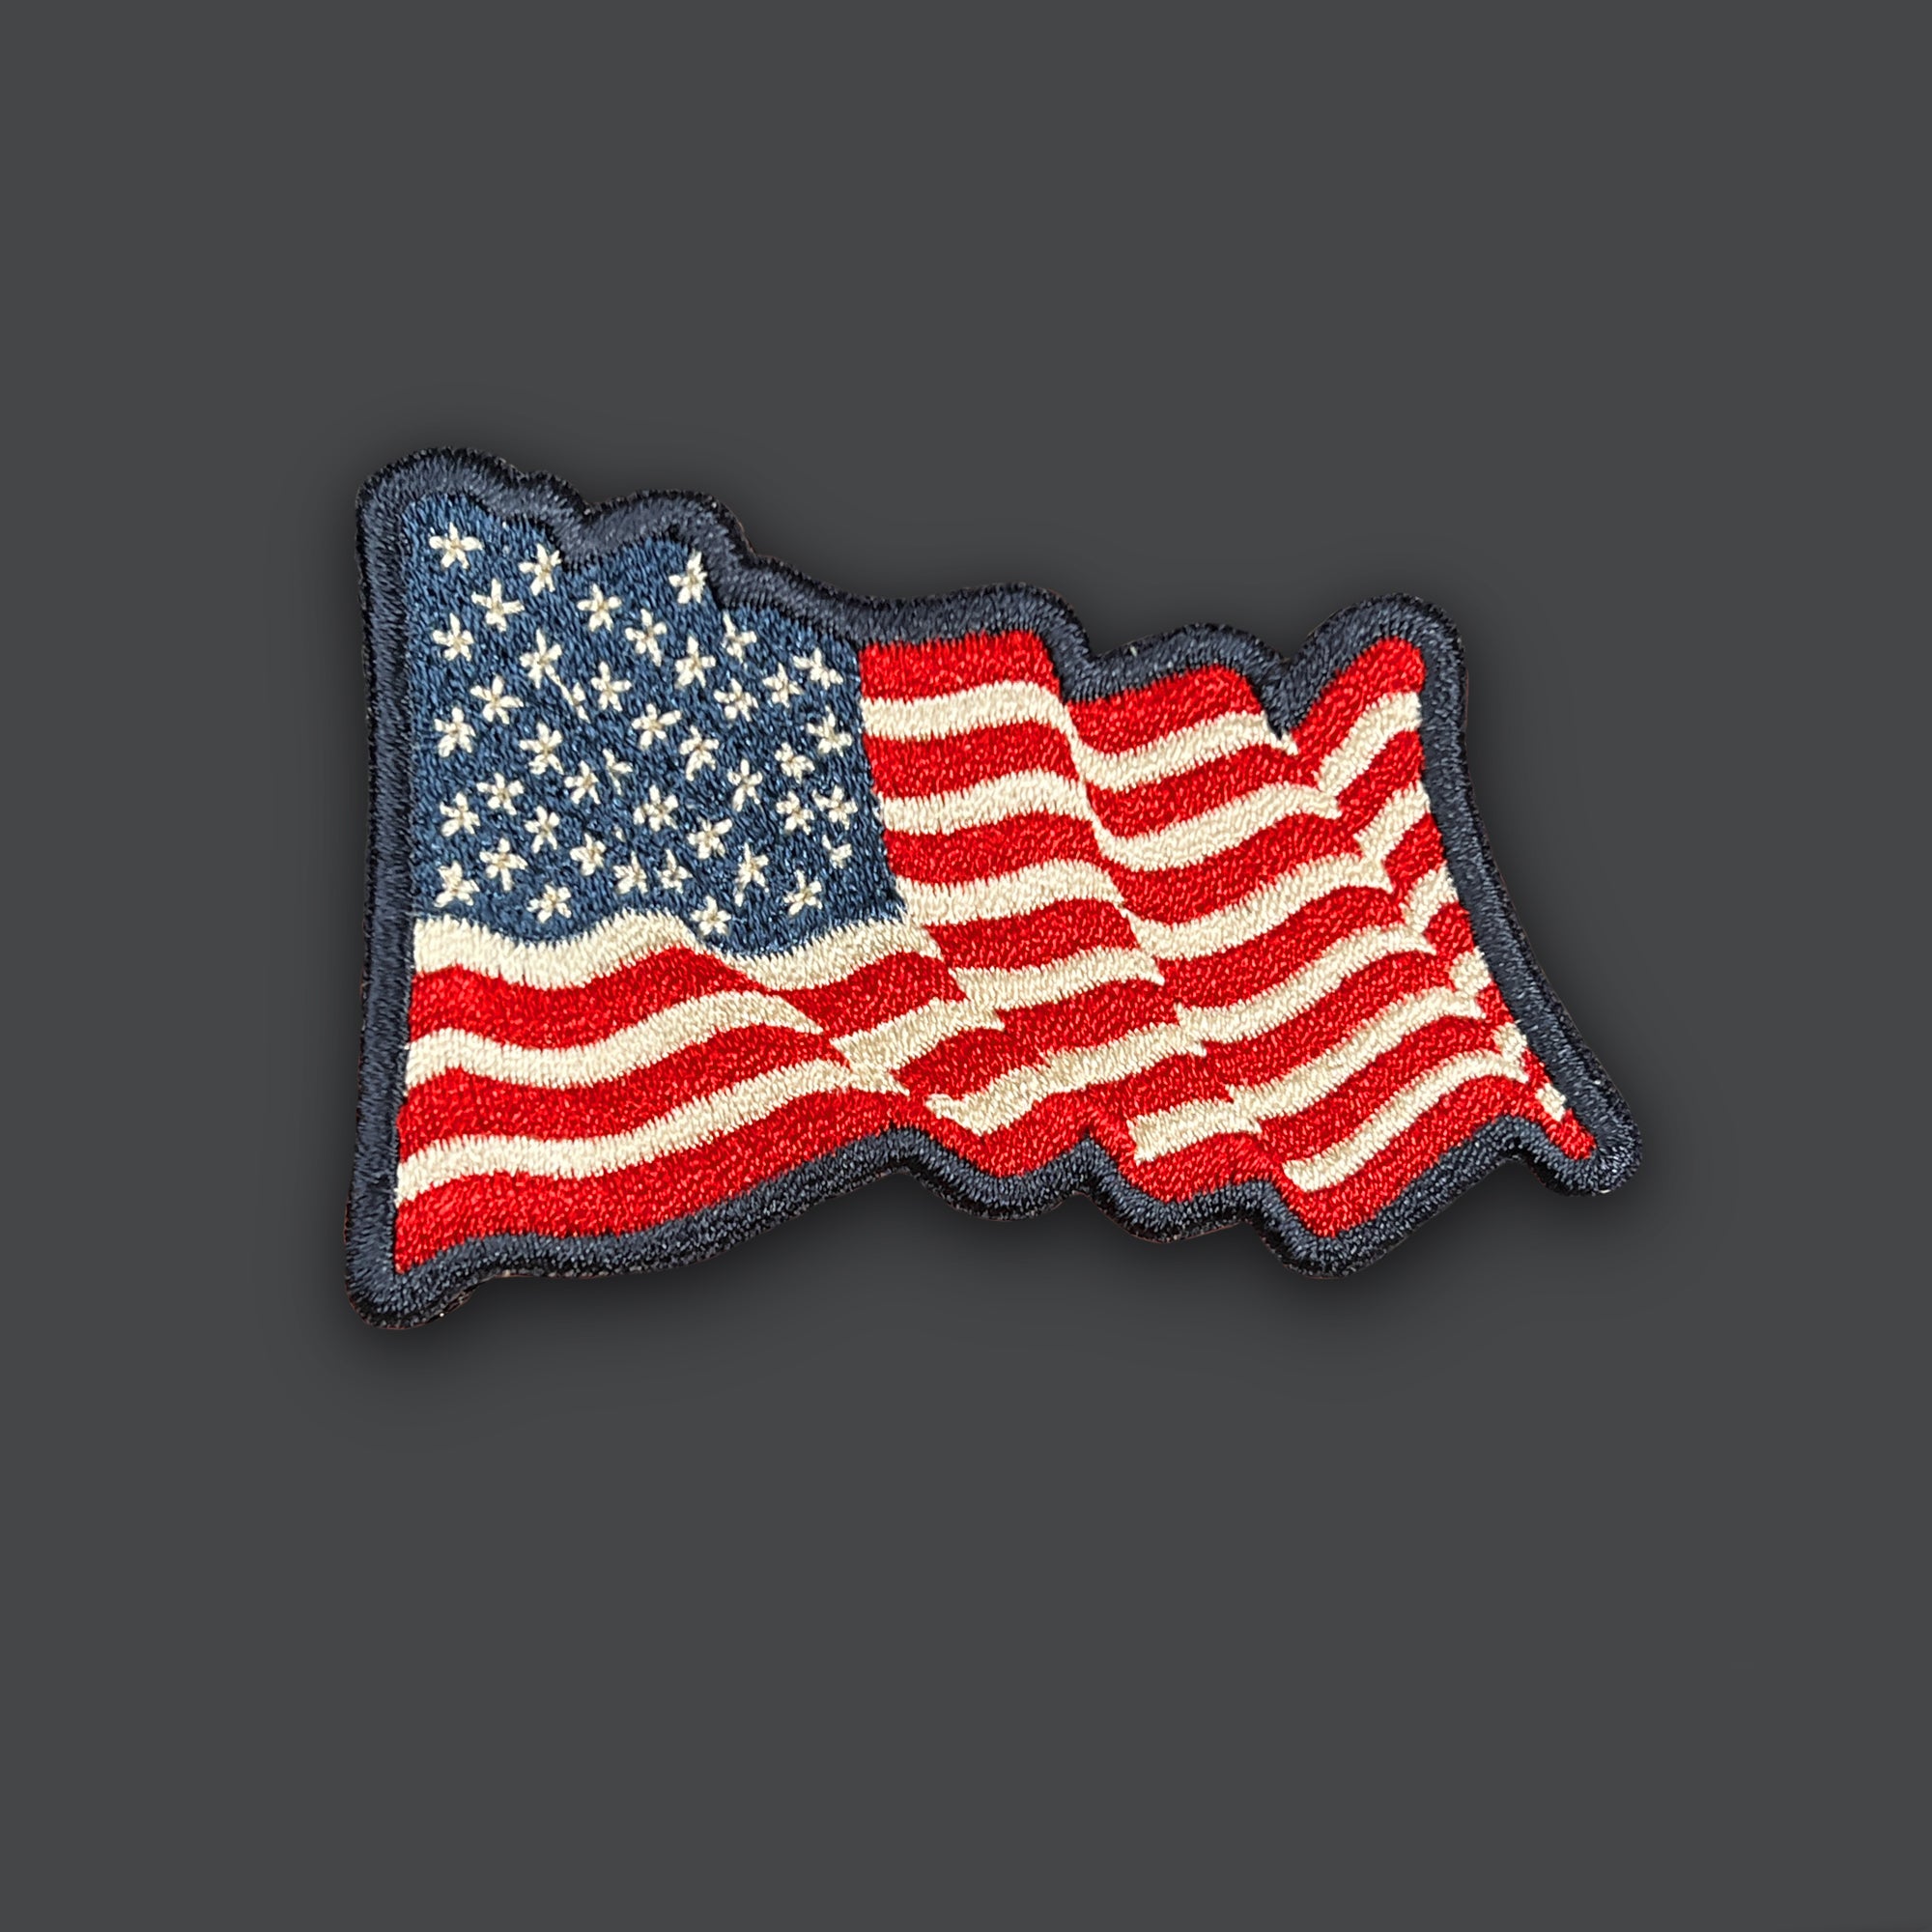 Waving American Flag Black Border Patch, U.S. Flag Patches